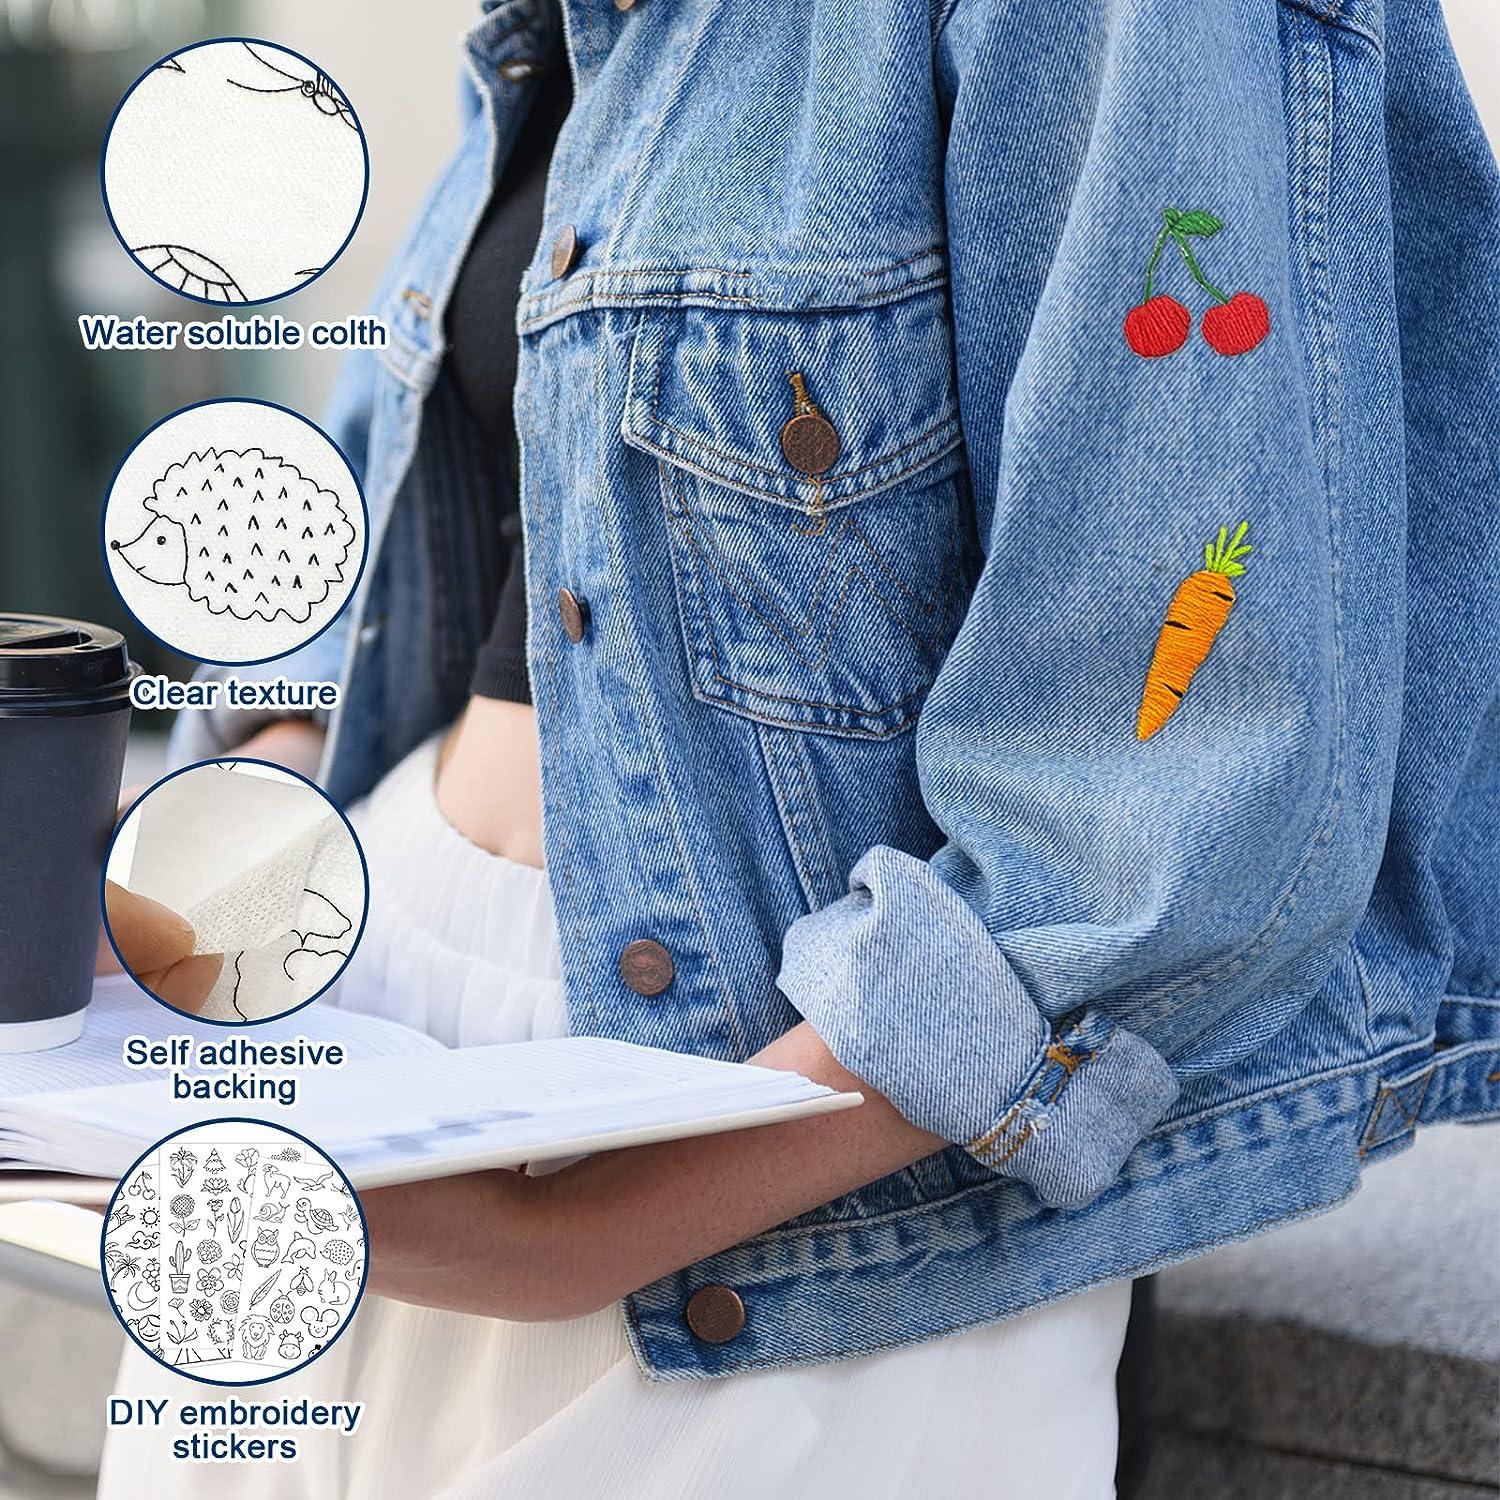  78 Pcs Water Soluble Embroidery Patterns Stabilizers, Stick and  Stitch Embroidery Transfers Paper Tear Away Embroidery Stabilizer with  Nature Patterns for Embroidery Hand Sewing Lover (Nature)